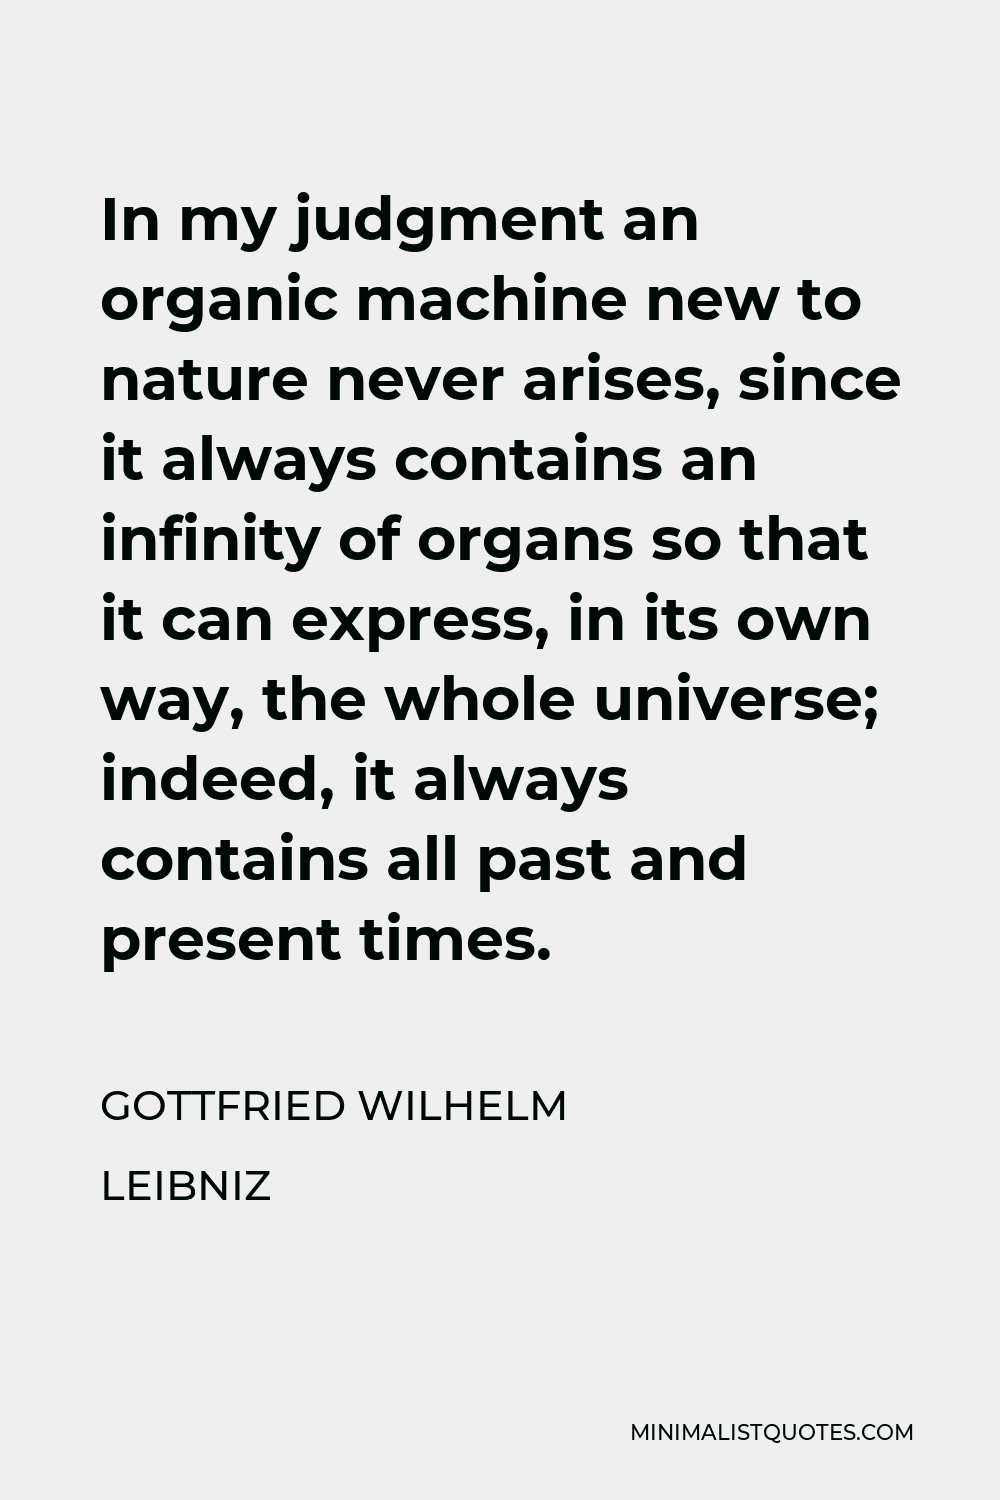 Gottfried Wilhelm Leibniz Quote - In my judgment an organic machine new to nature never arises, since it always contains an infinity of organs so that it can express, in its own way, the whole universe; indeed, it always contains all past and present times.